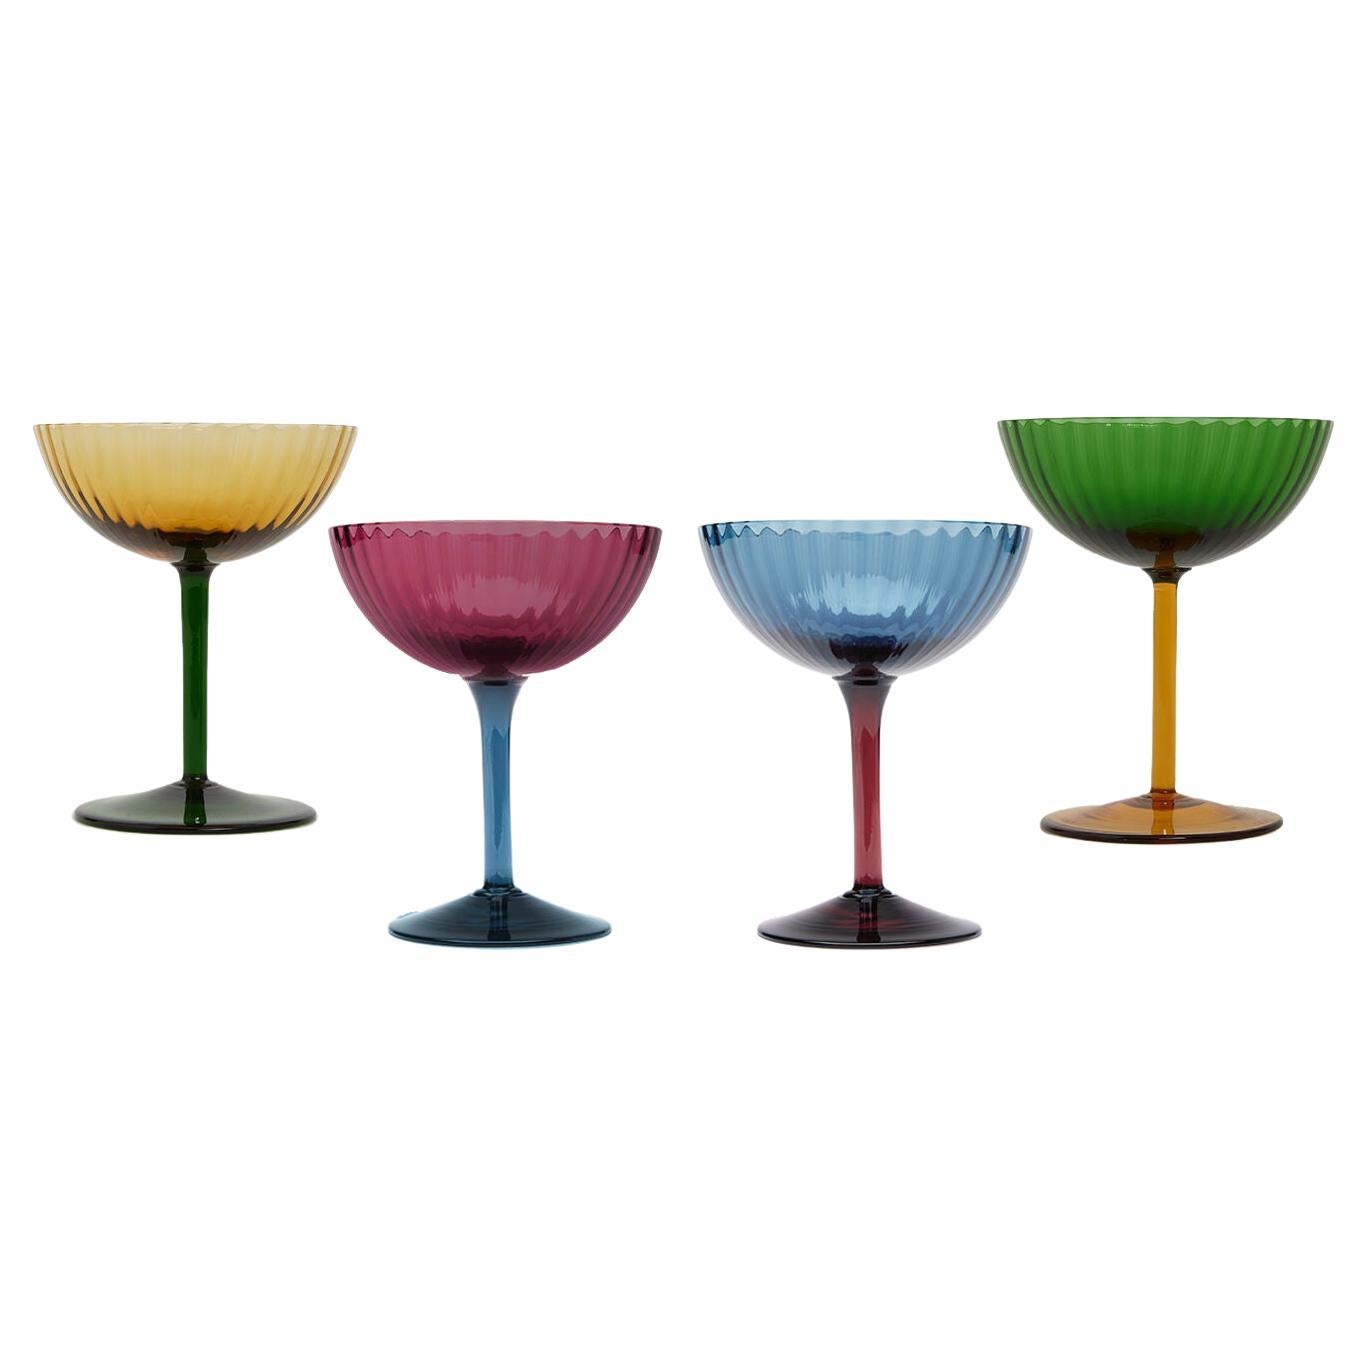 Champagne Coupe Set of 4 by La DoubleJ, Murano Glass, Made in Italy